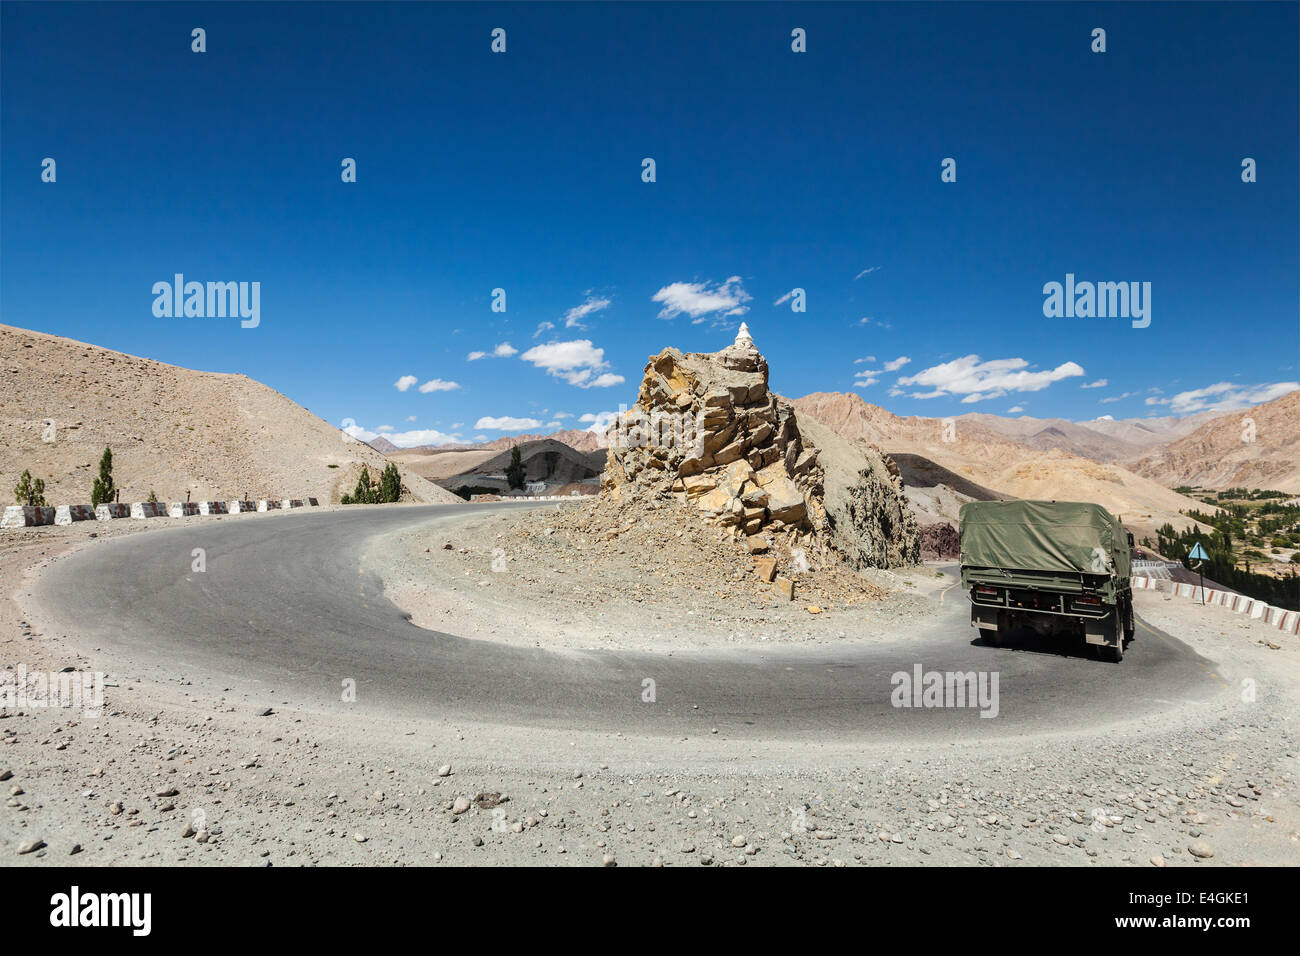 Road in Himalayas with army truck. Ladakh, India Stock Photo